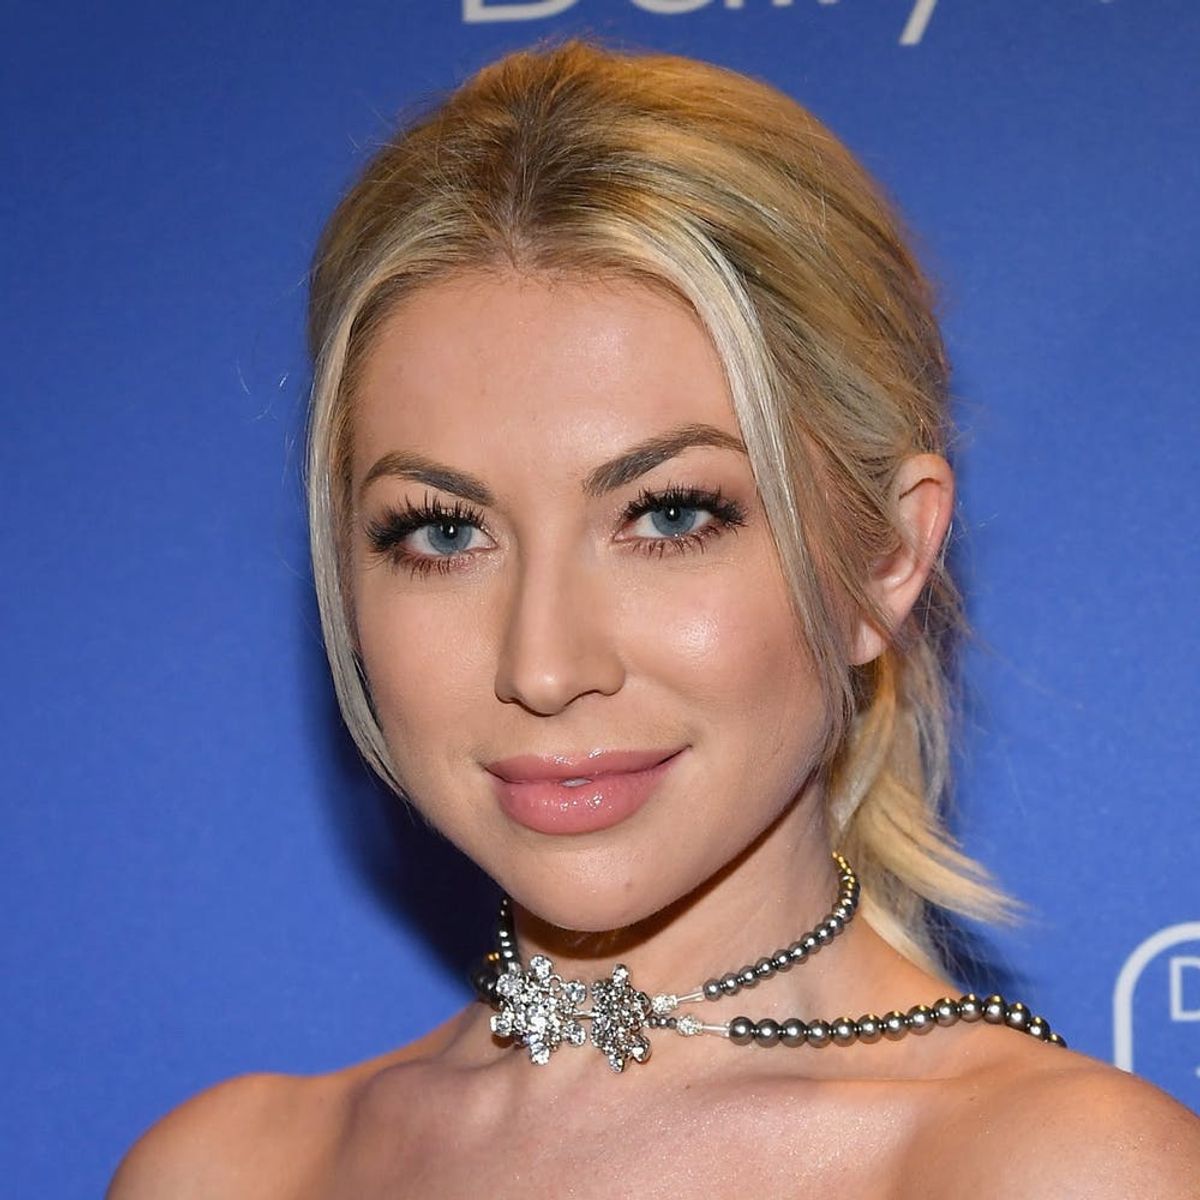 Stassi Schroeder Is Under Fire (Again) for a SUPER Controversial Photo Caption